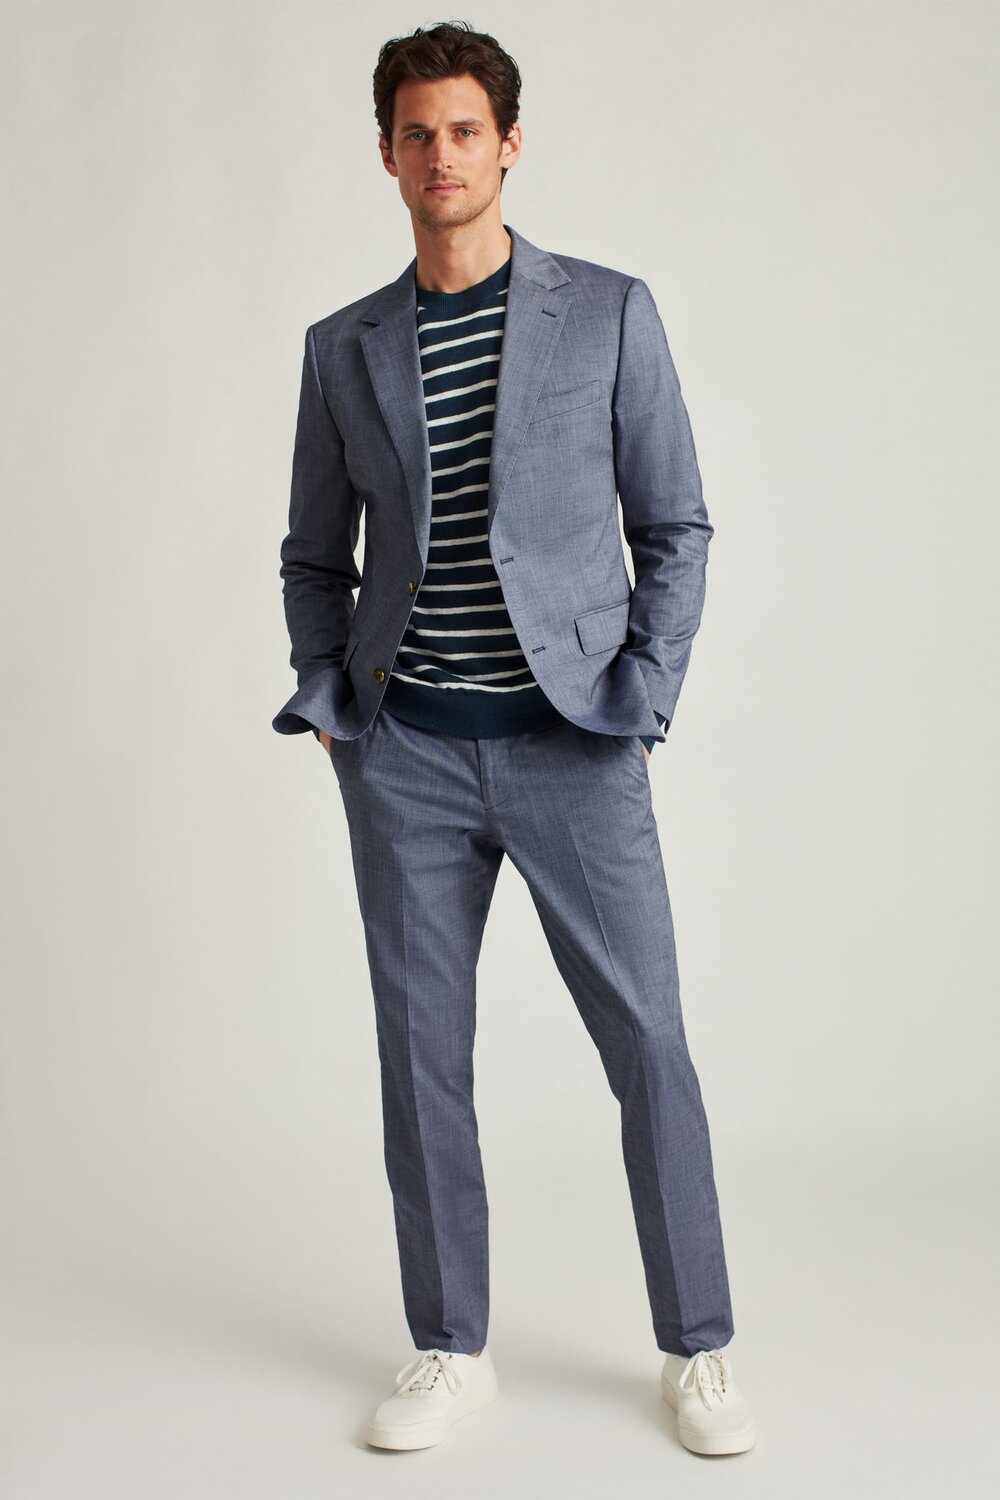 Bonobos - Stretch Chambray Suit